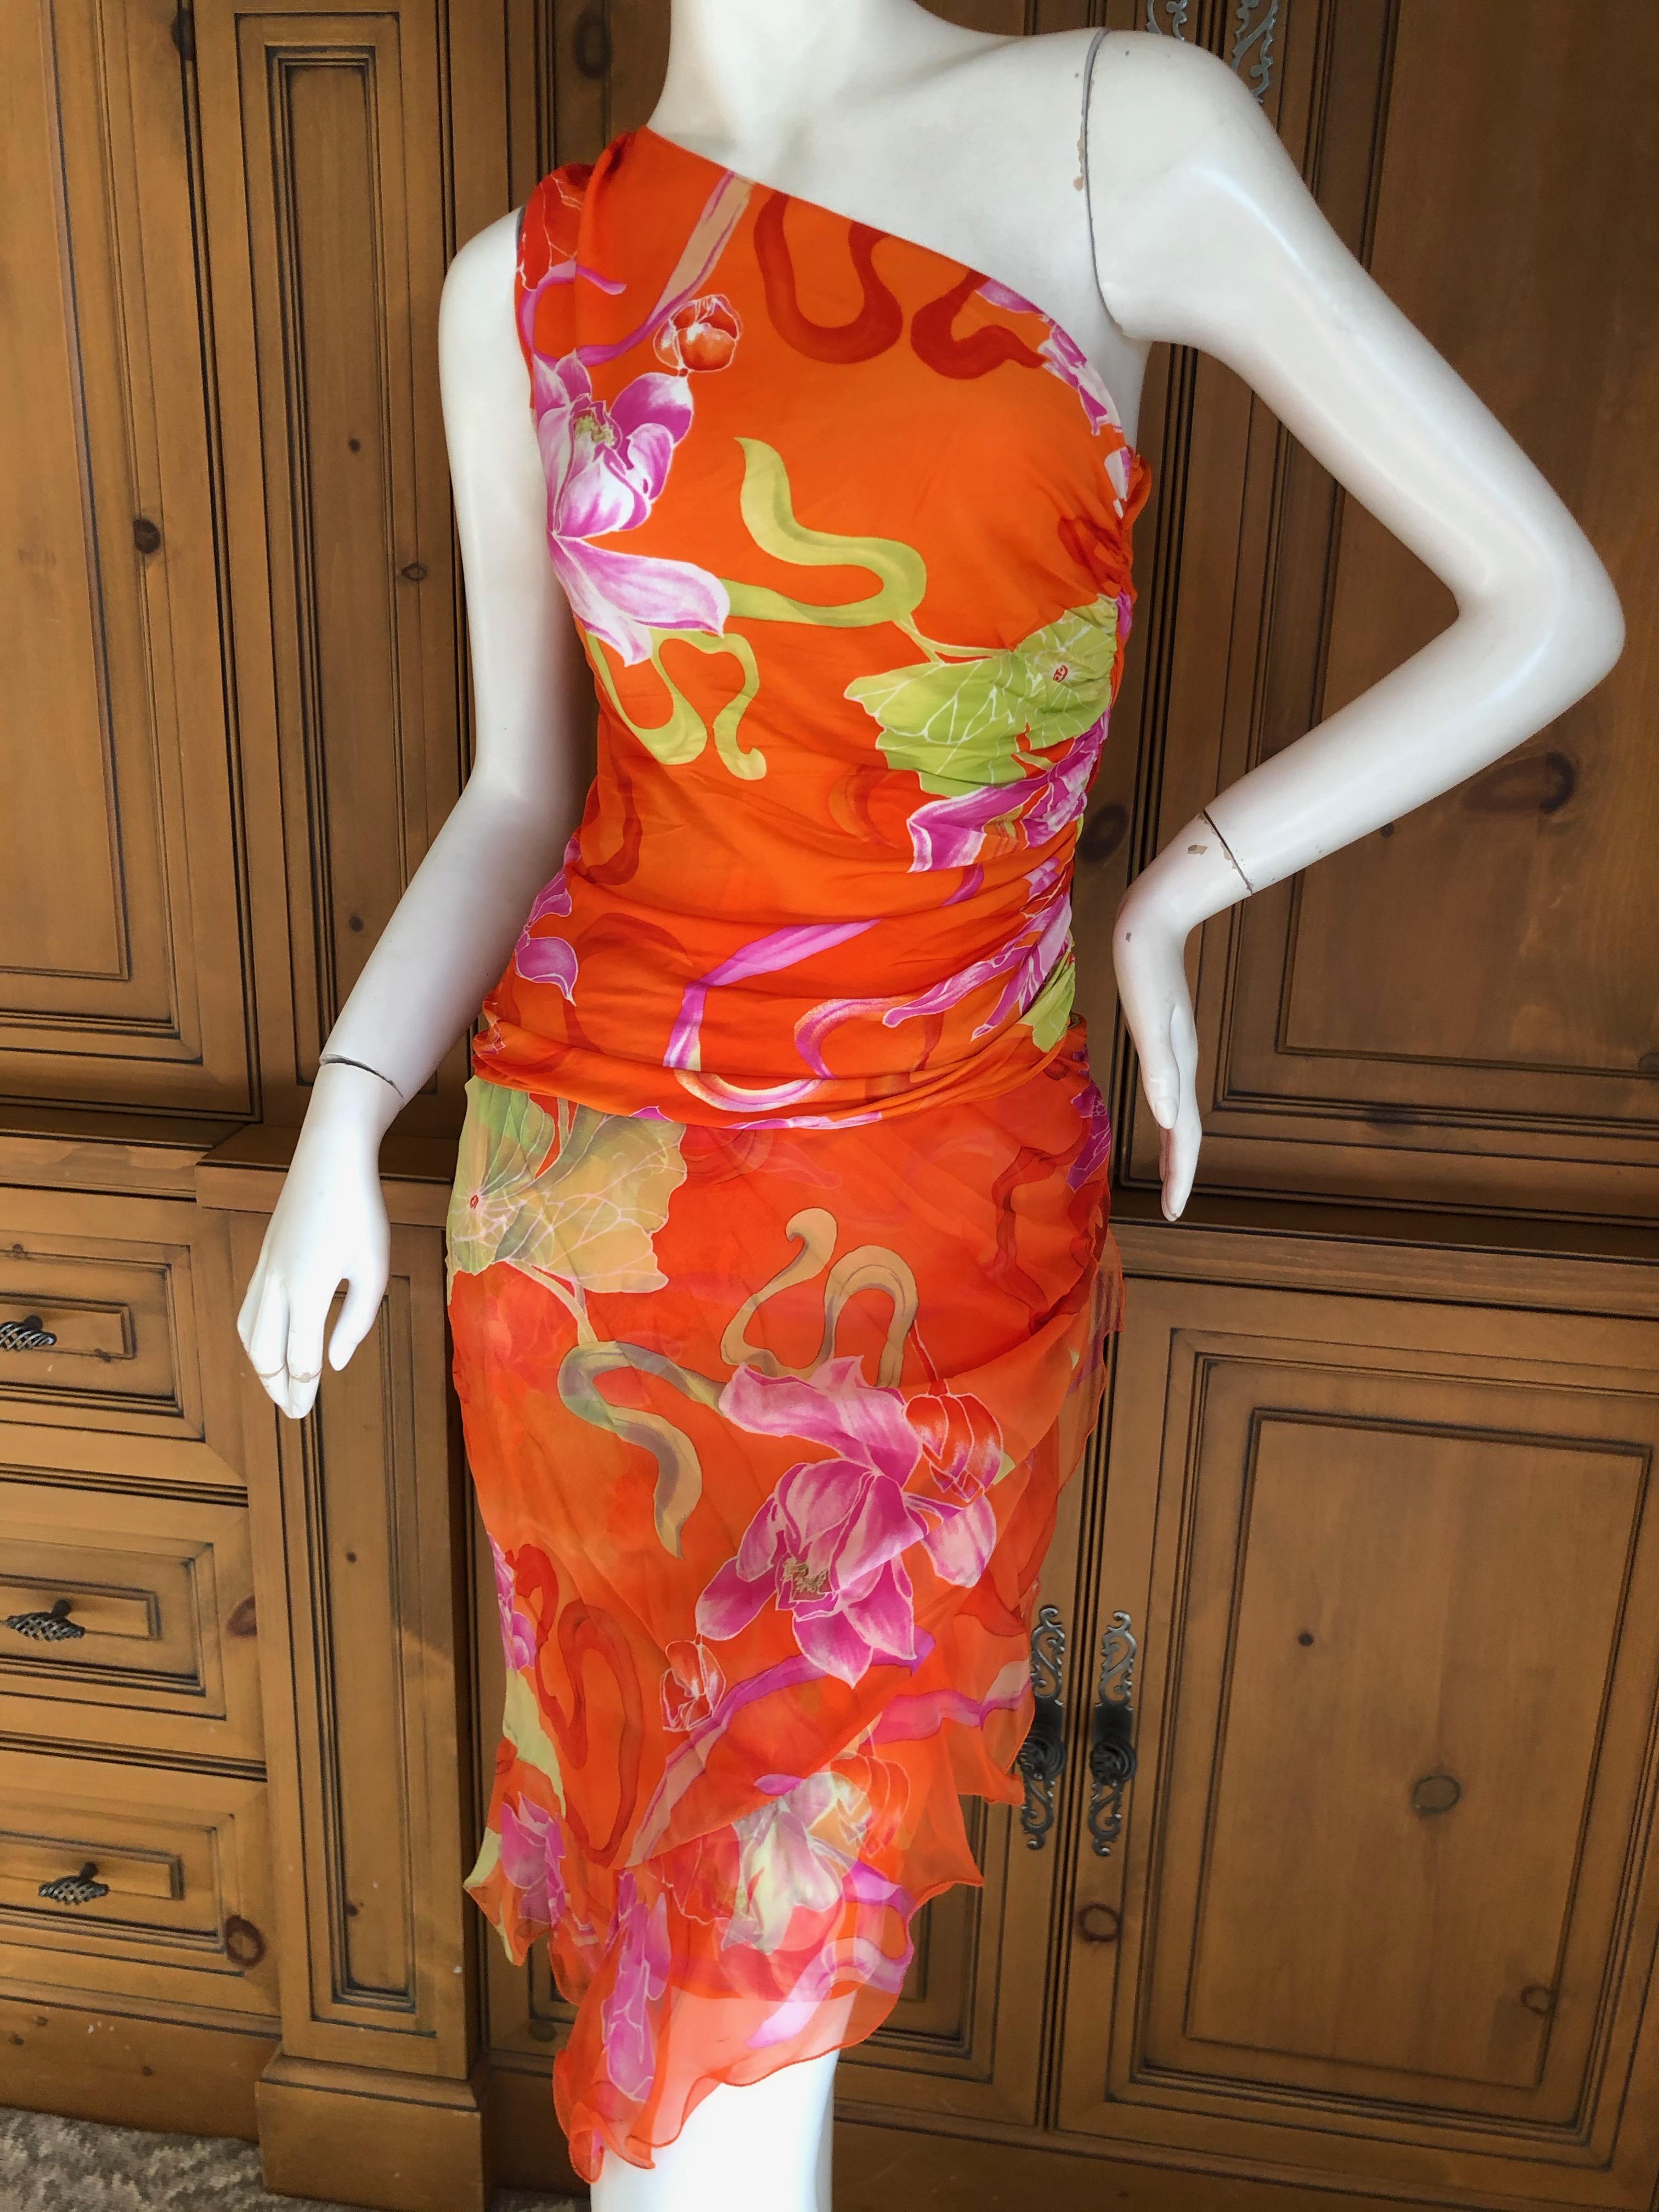 Emanuel Ungaro 3 Piece Silk Floral One Shoulder Dress w Shawl by Peter Dundas.
Featuring a flounced skirt with side zipper, one shoulder top, and matching shawl.
Size 38
Bust 36